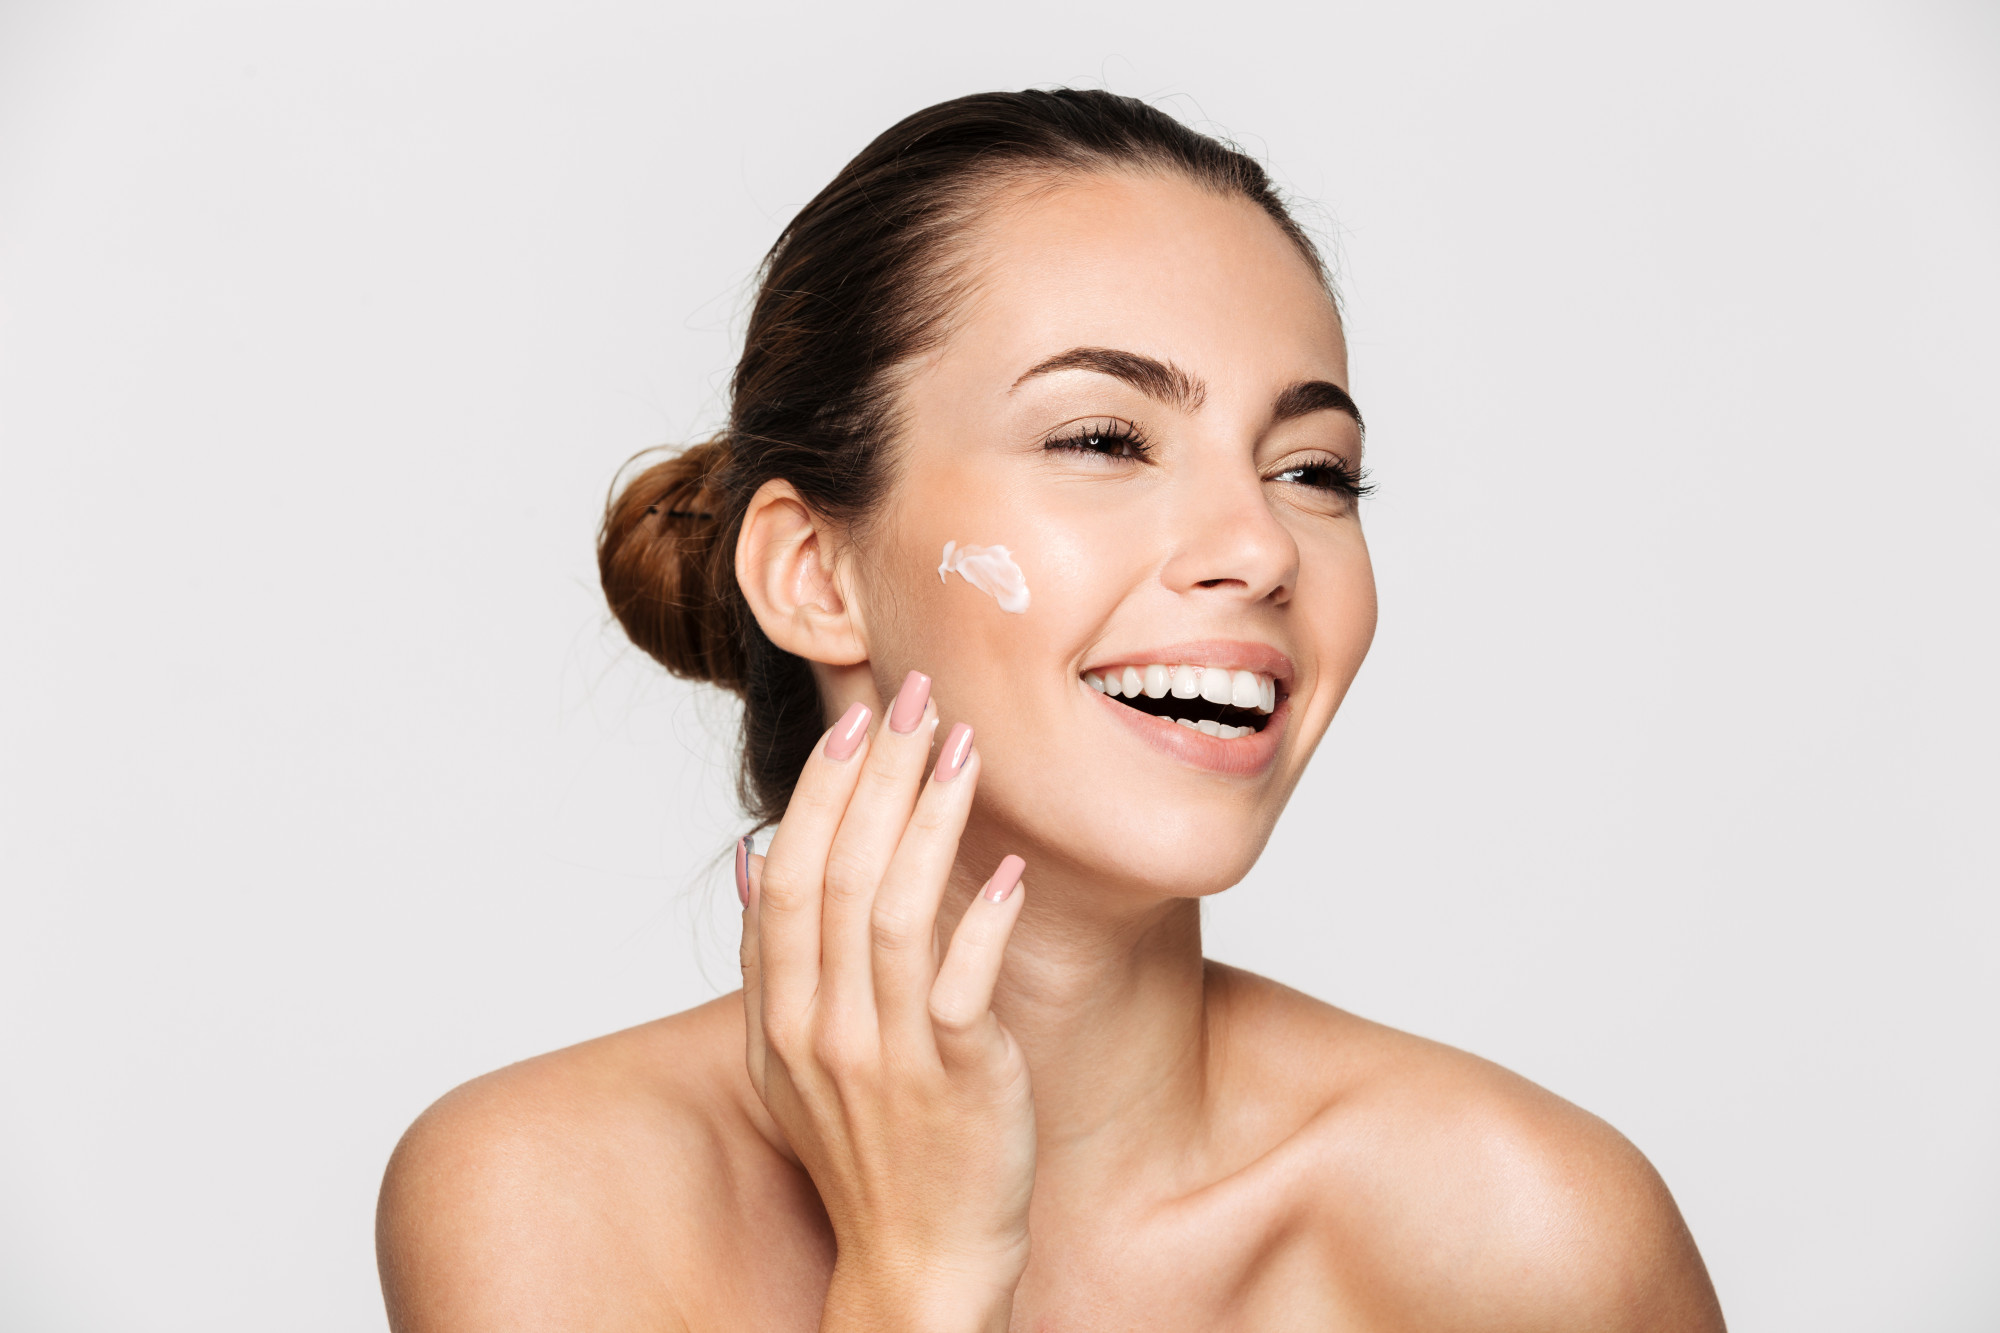 Have you ever asked yourself the question: why is skin care important? Read on to learn more about the reasons why it is important to take care of your skin.